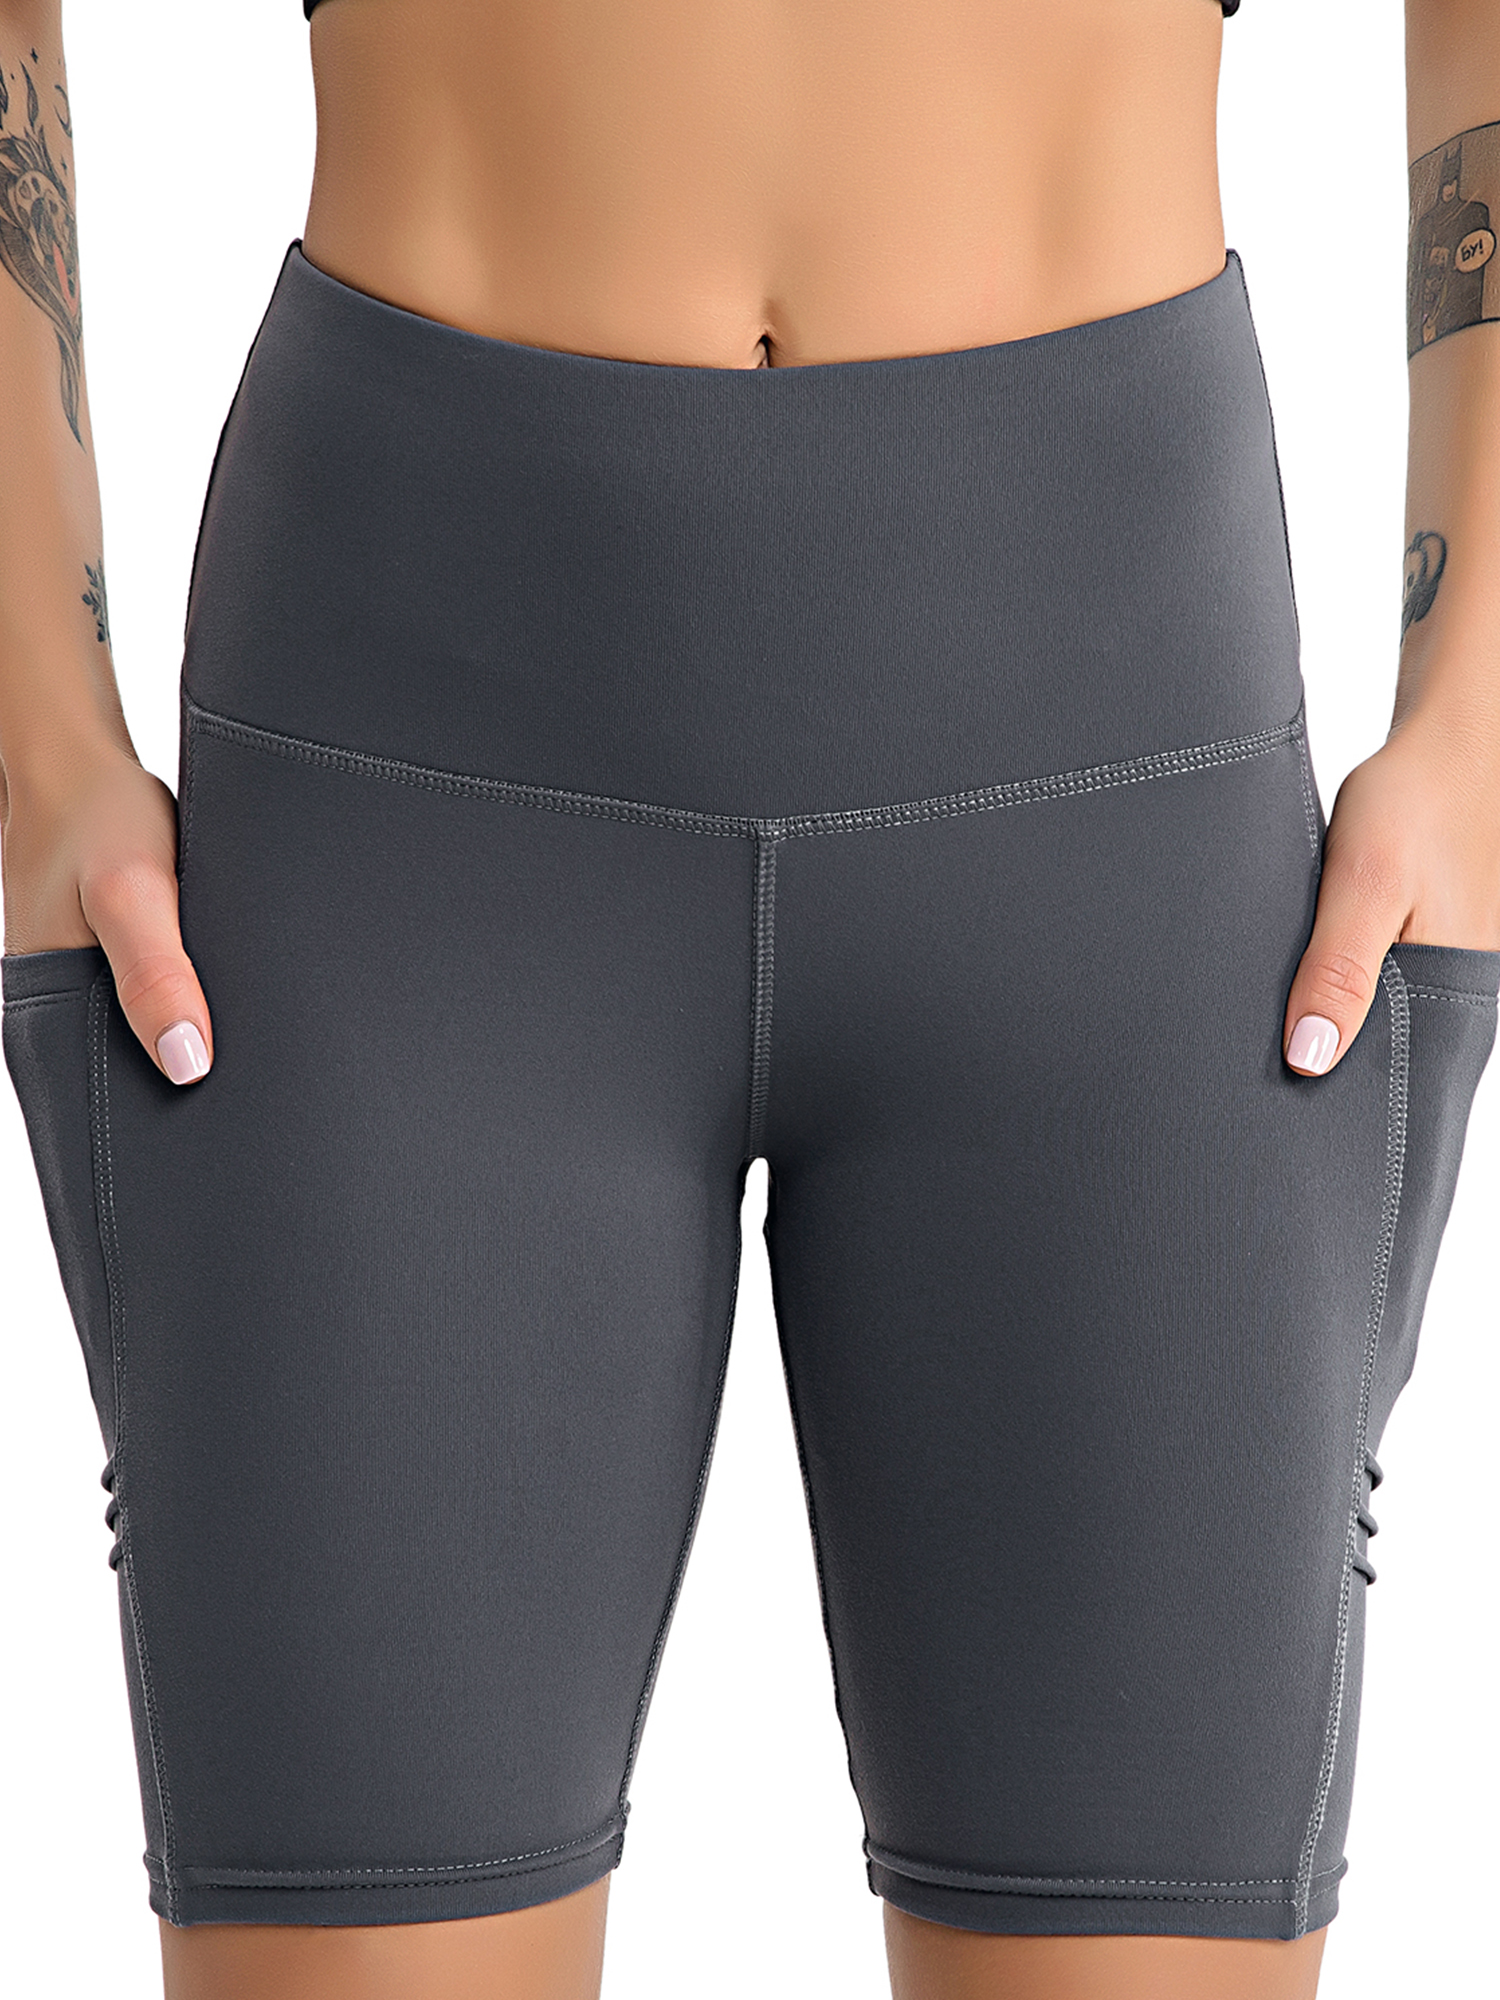 High Waist Tummy Control Workout Yoga Shorts Side Pockets for Women Compression Running Sports Workout Gym Athletic Wear - image 1 of 6